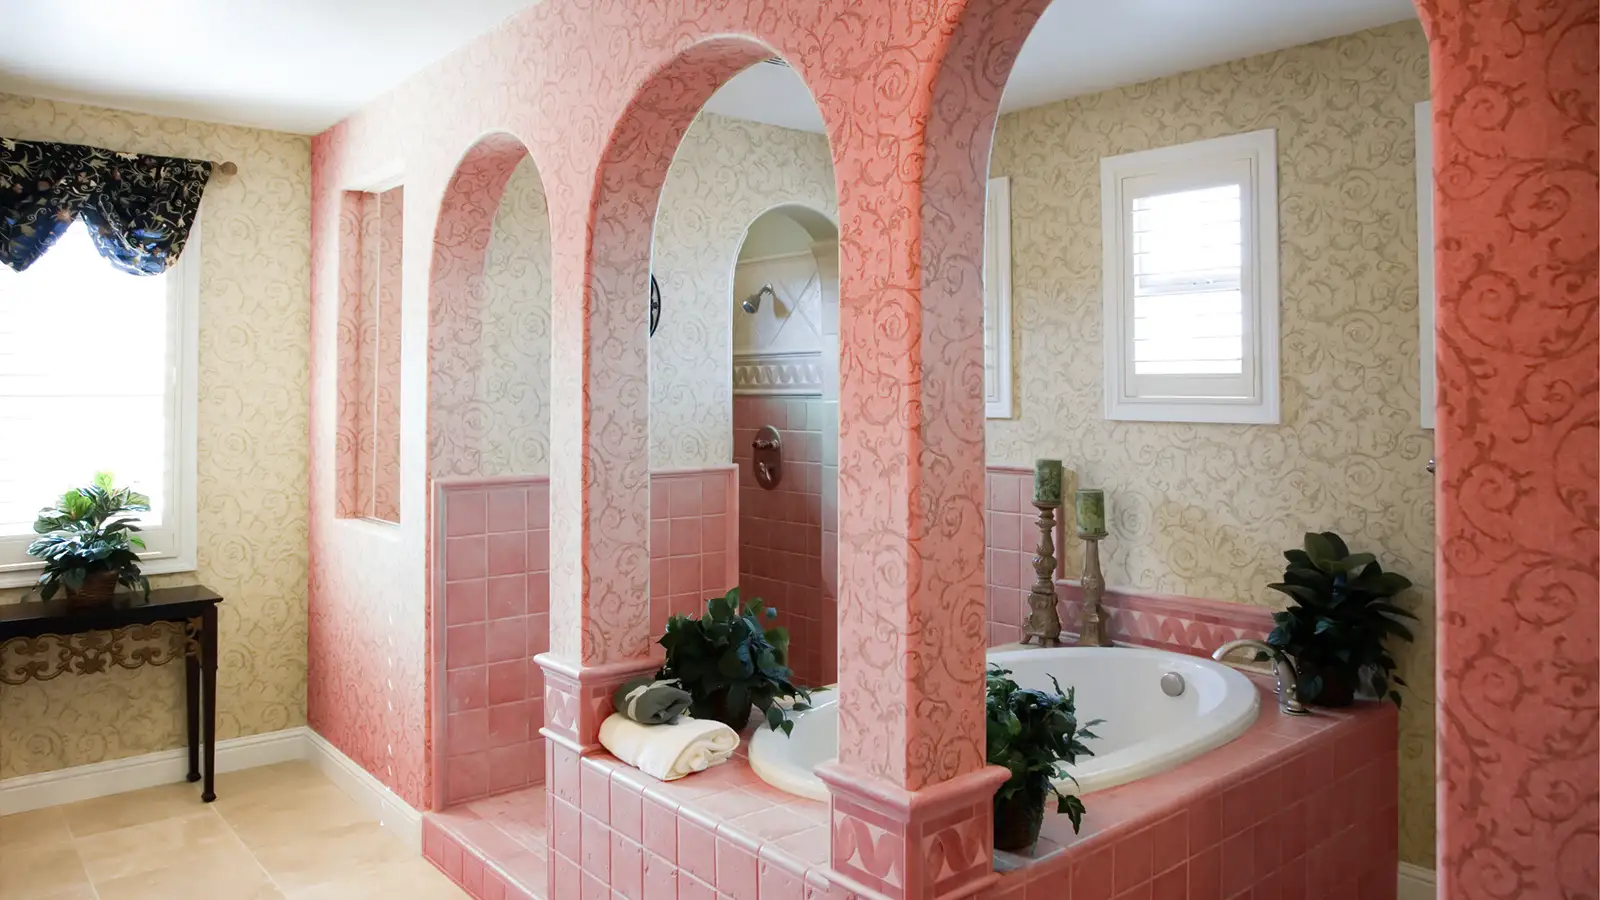 A bathroom with pink walls and arches.